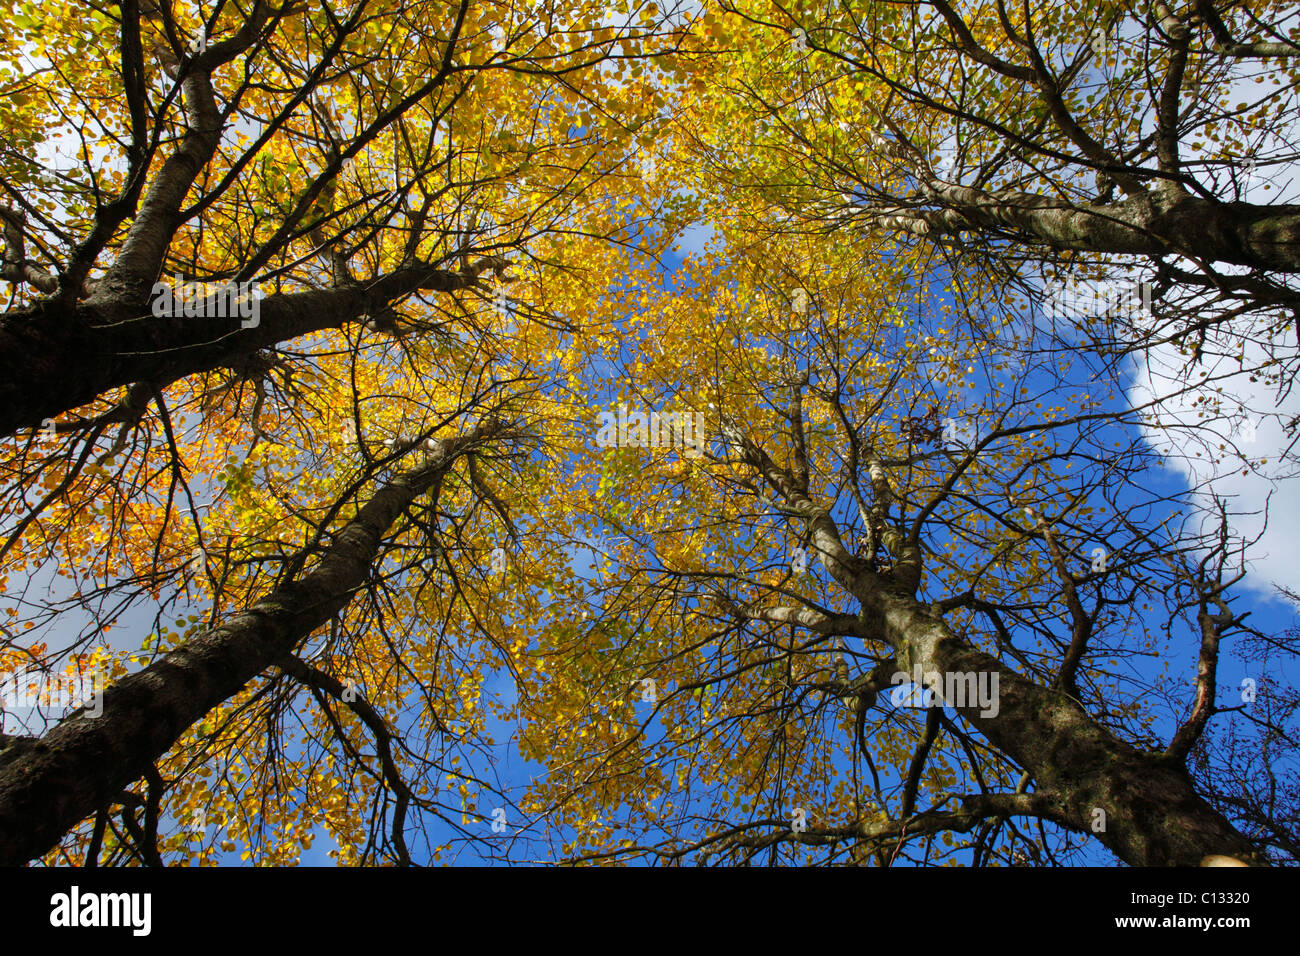 Aspen (Populus tremula) trees with leaves turning yellow in Autumn. Ceredigion, Wales. October. Stock Photo